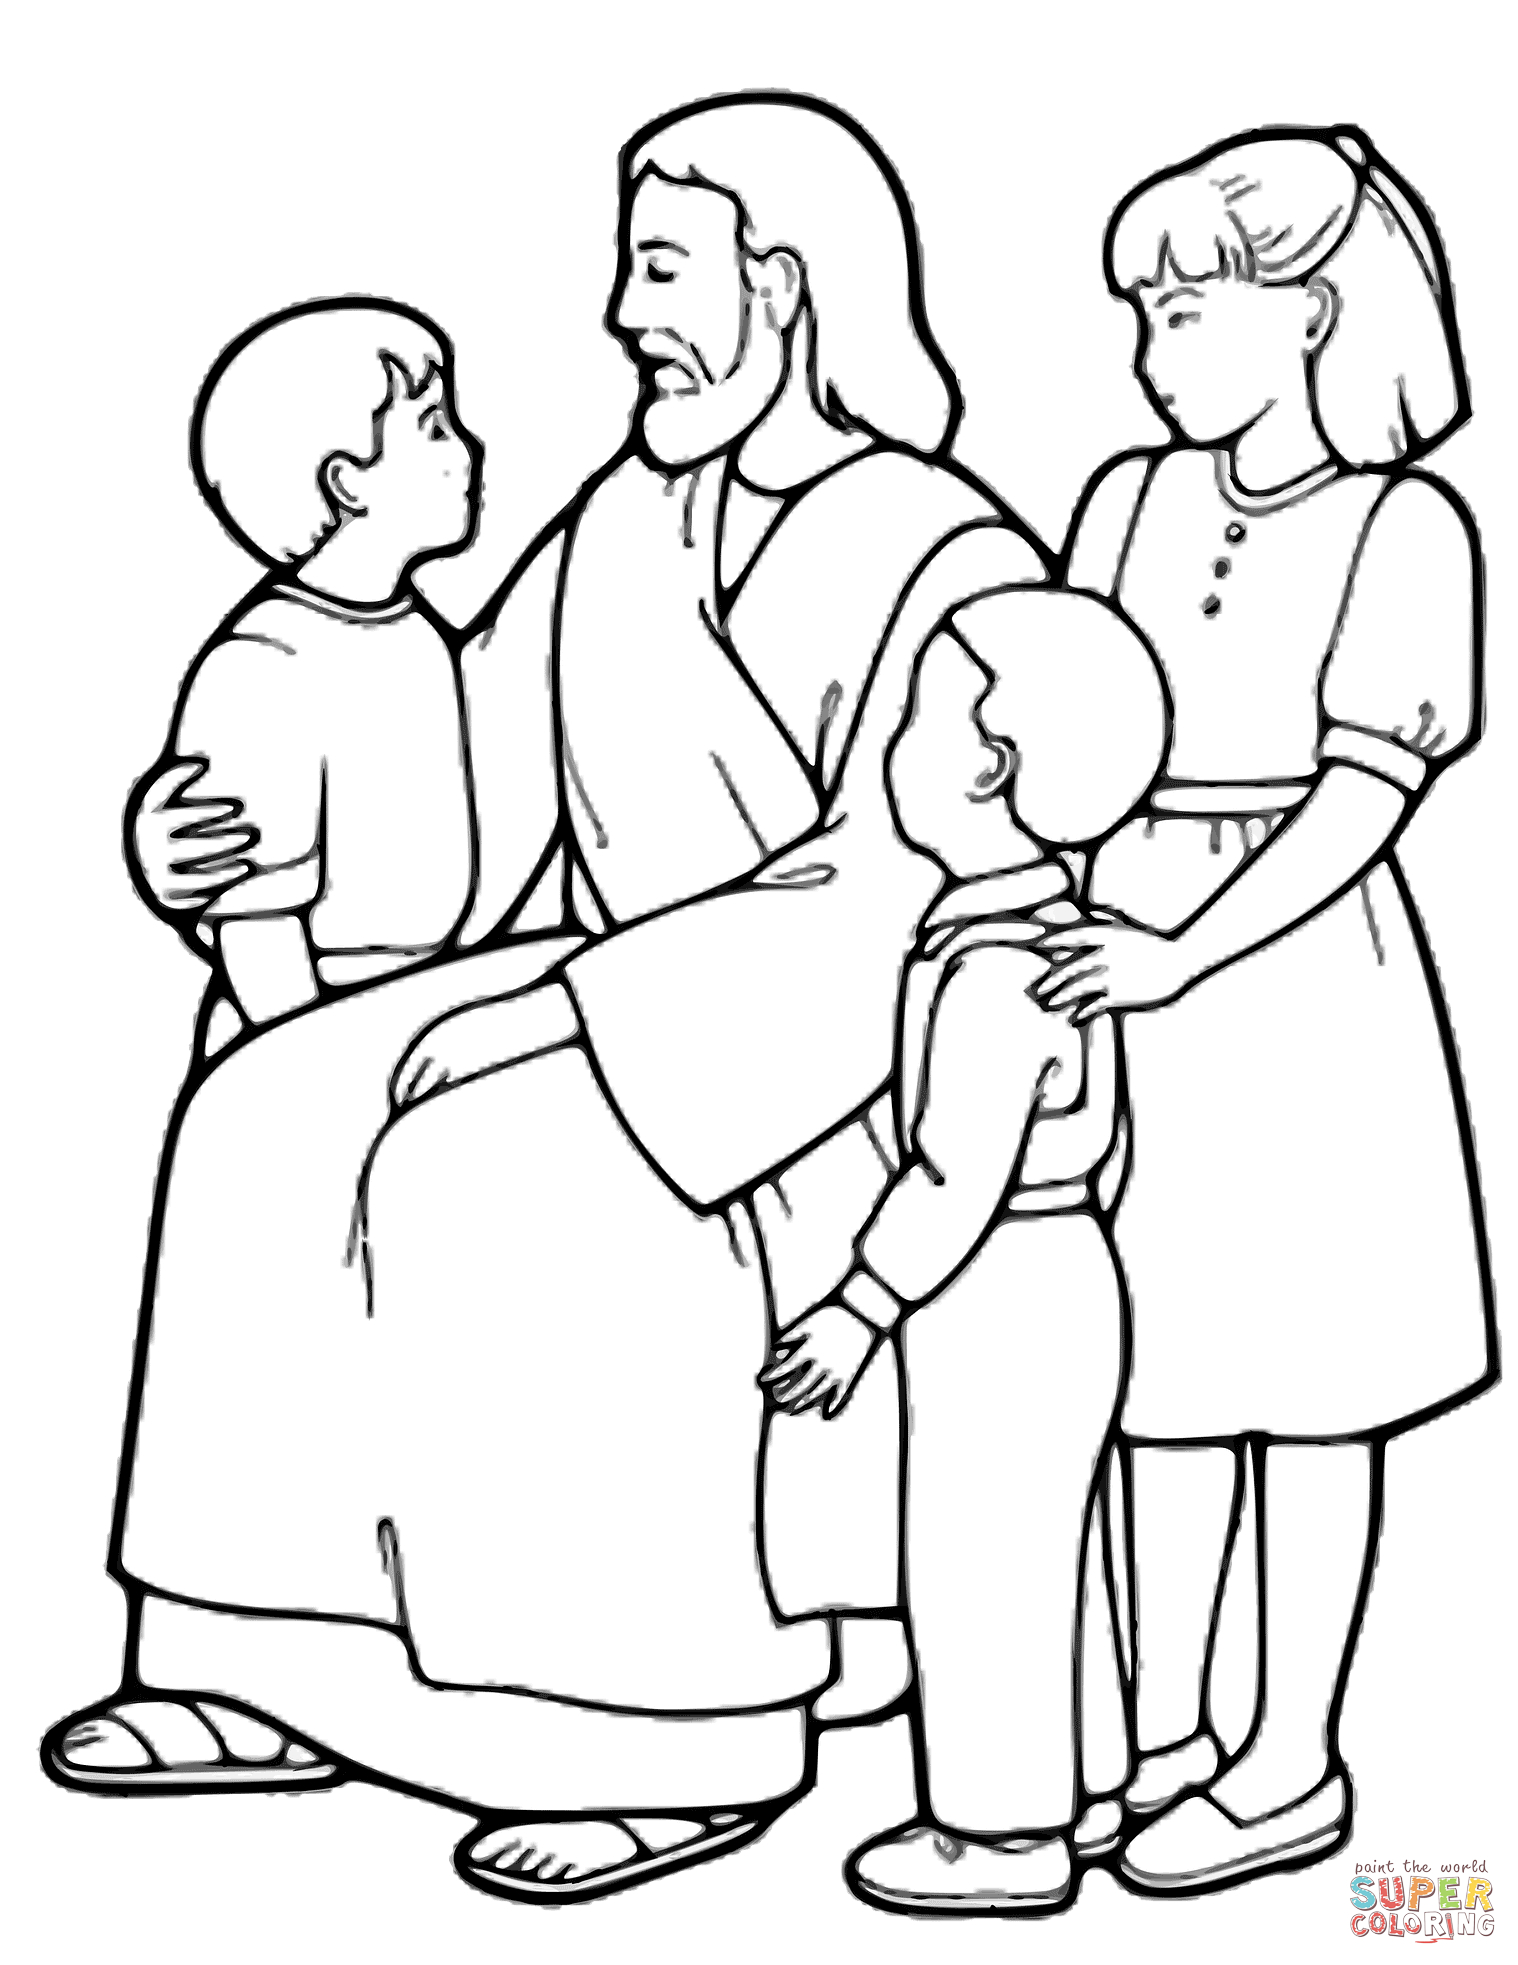 The Little Children And Jesus Coloring Page | Free Printable - Free Printable Jesus Coloring Pages